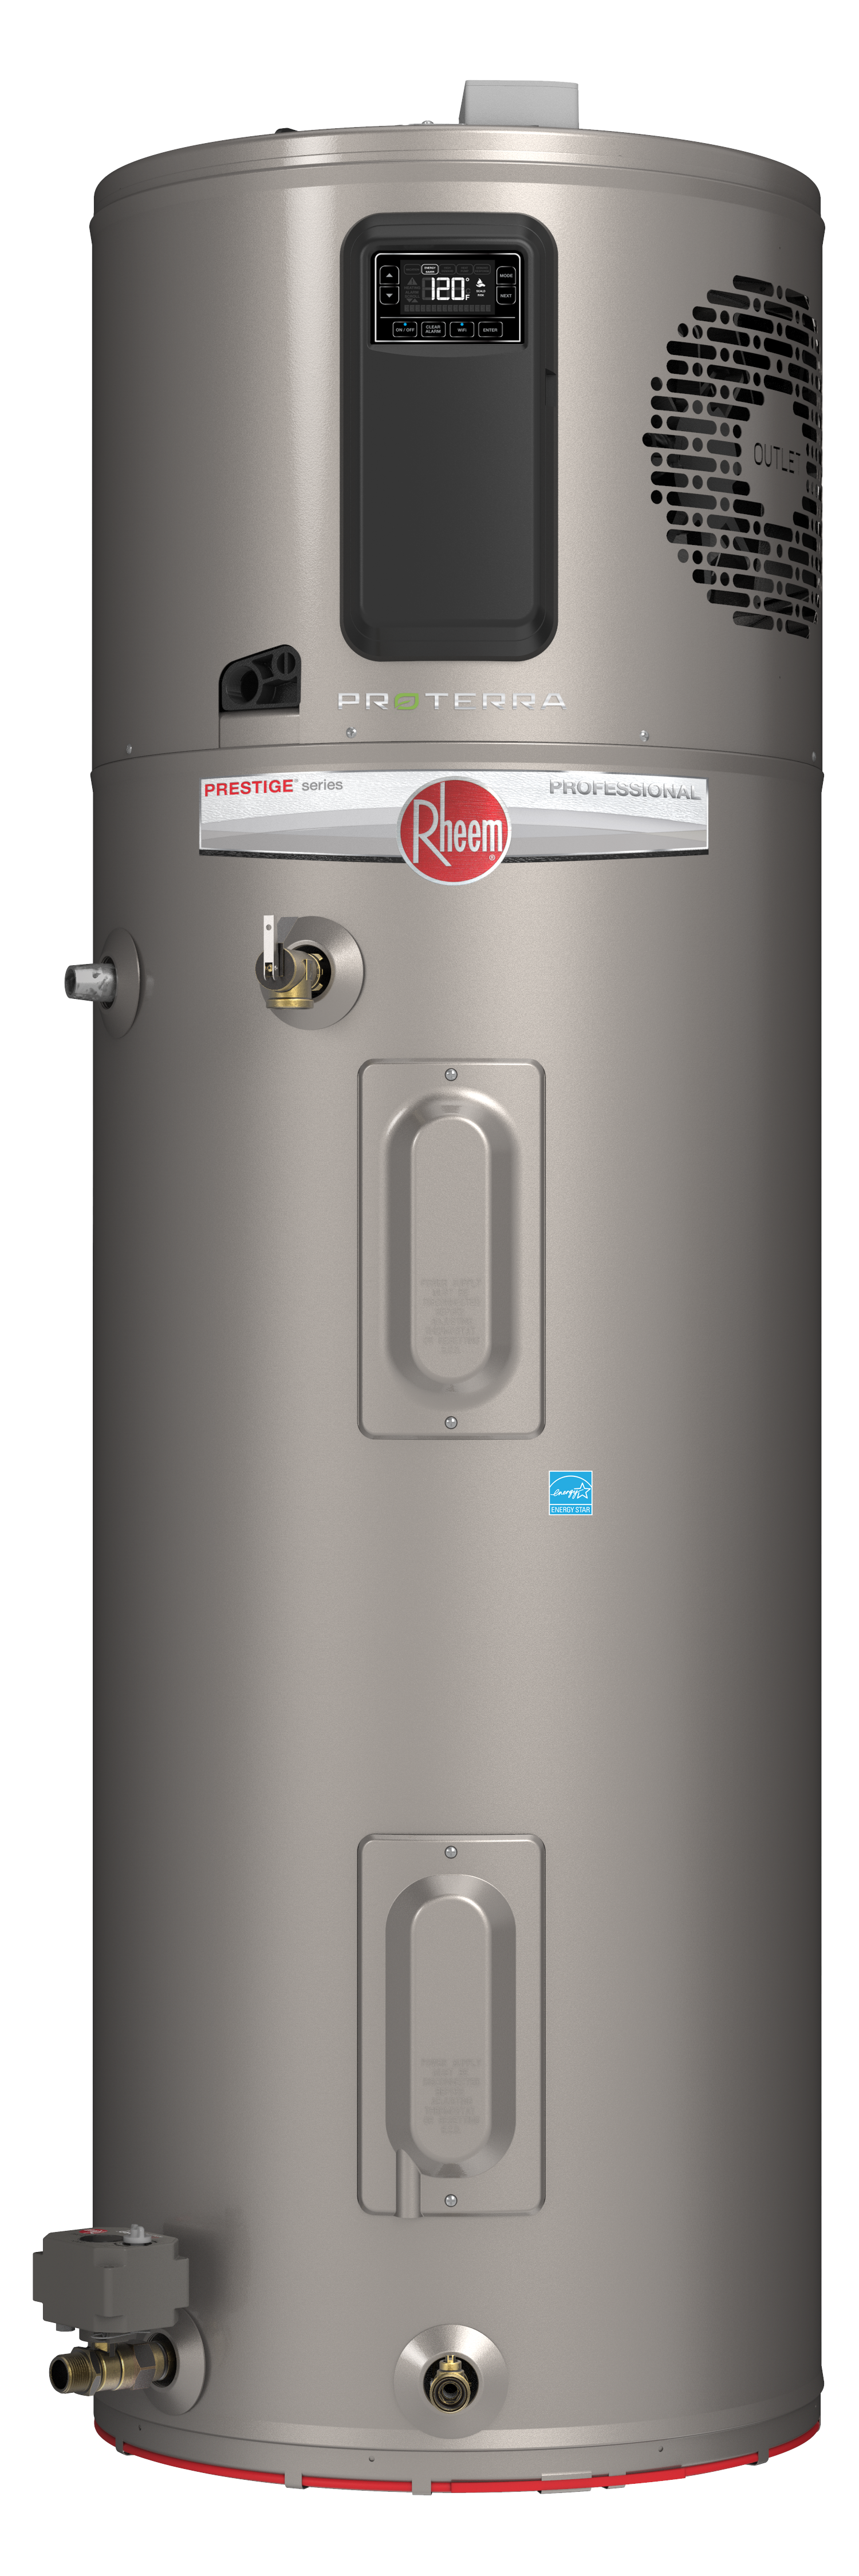 rheem-says-its-new-proterra-hybrid-water-heater-is-the-most-efficient